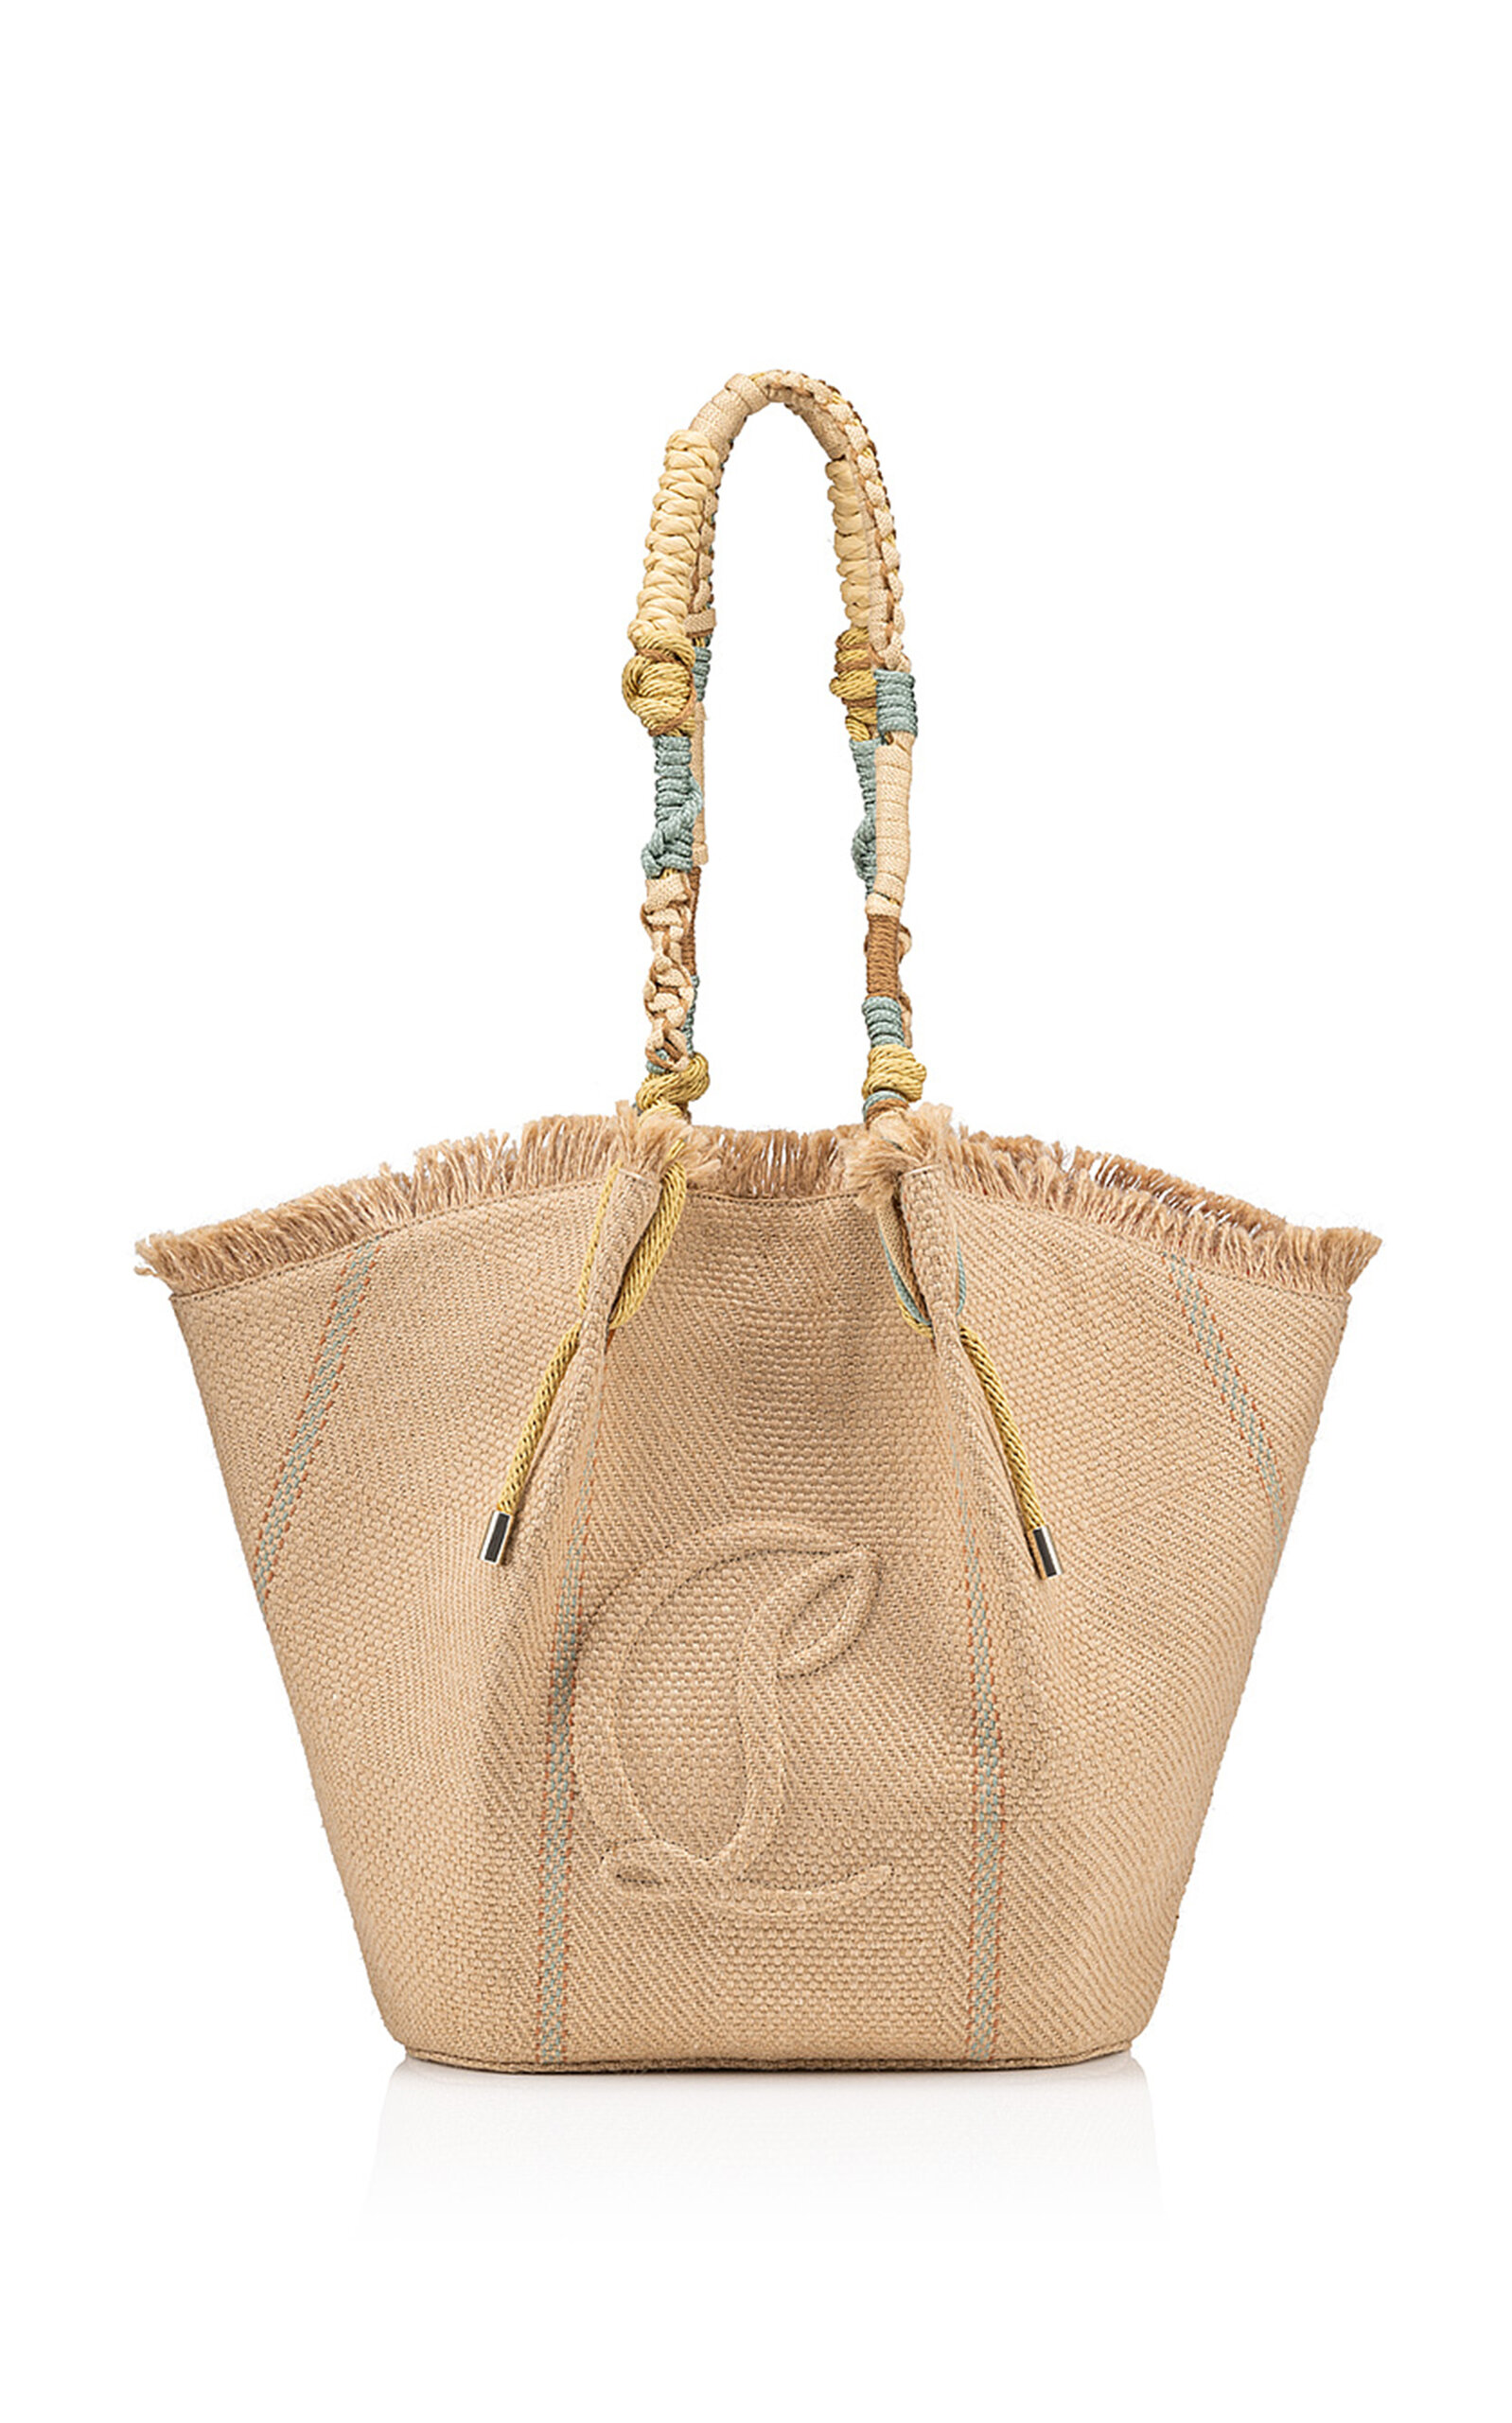 By My Side Woven Jute Tote Bag